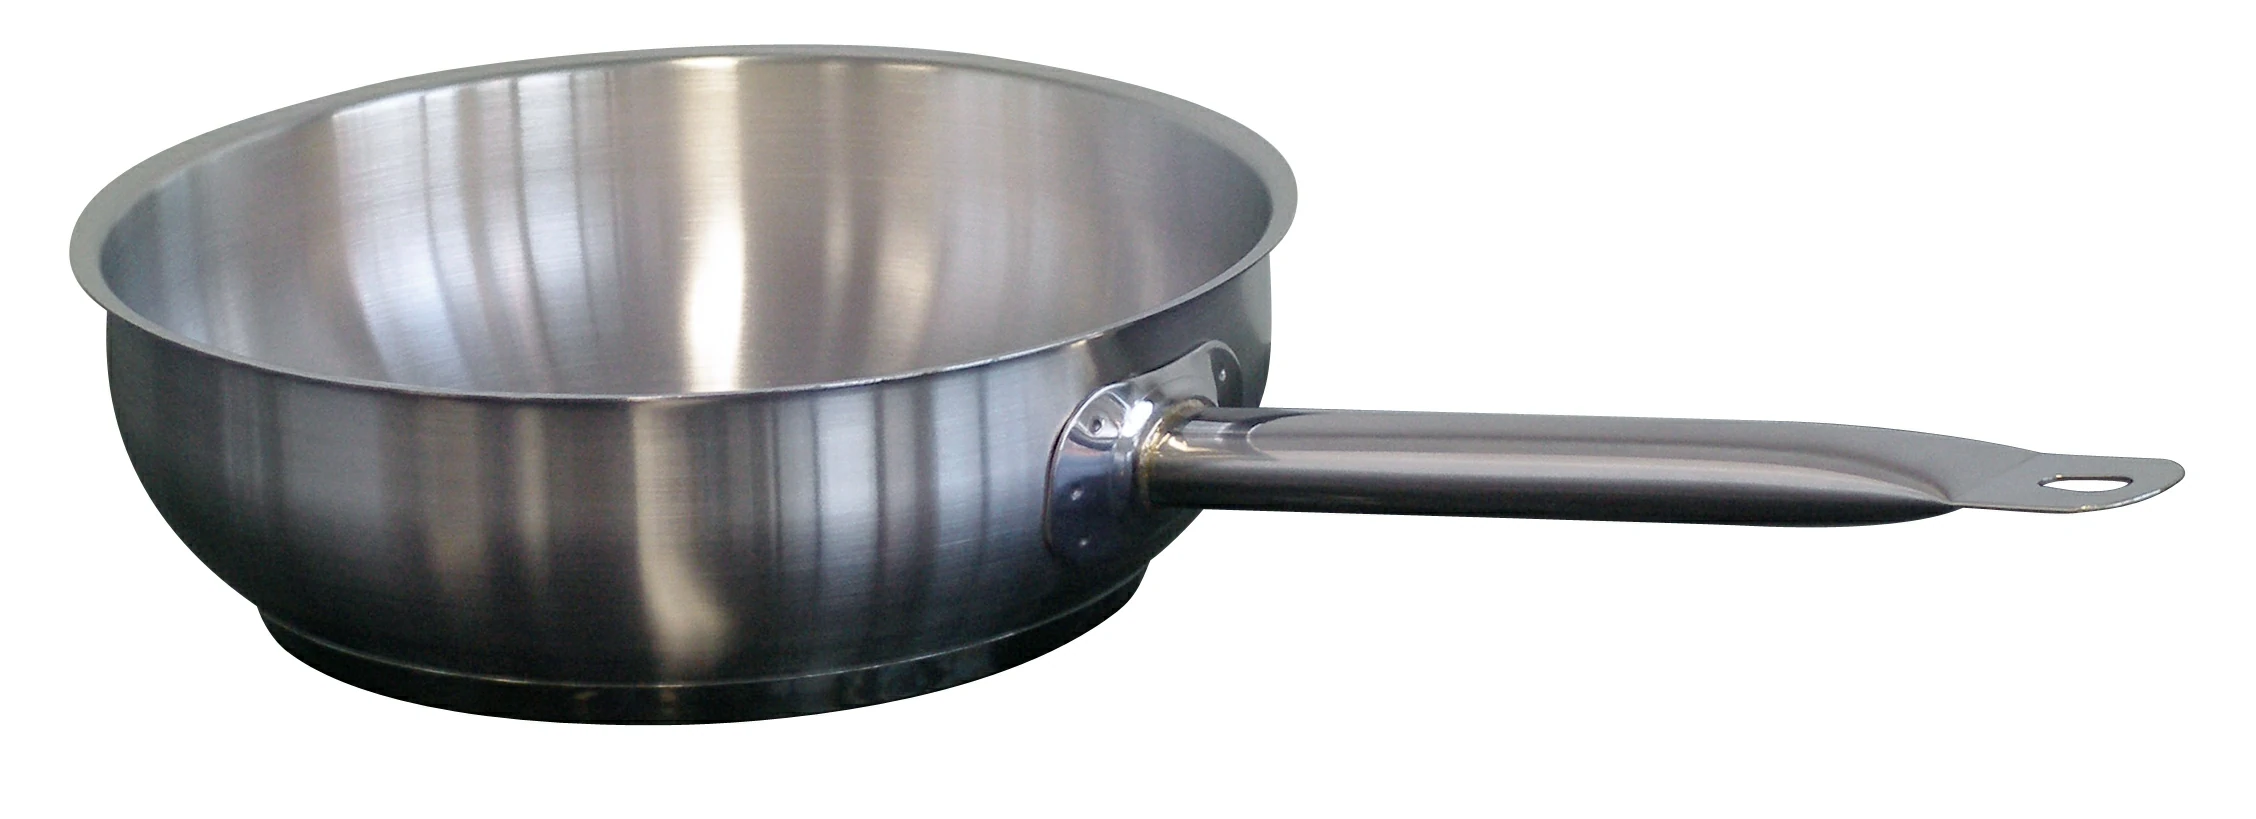 Forje CS3 Stainless steel 2.75 litre conical saucepan